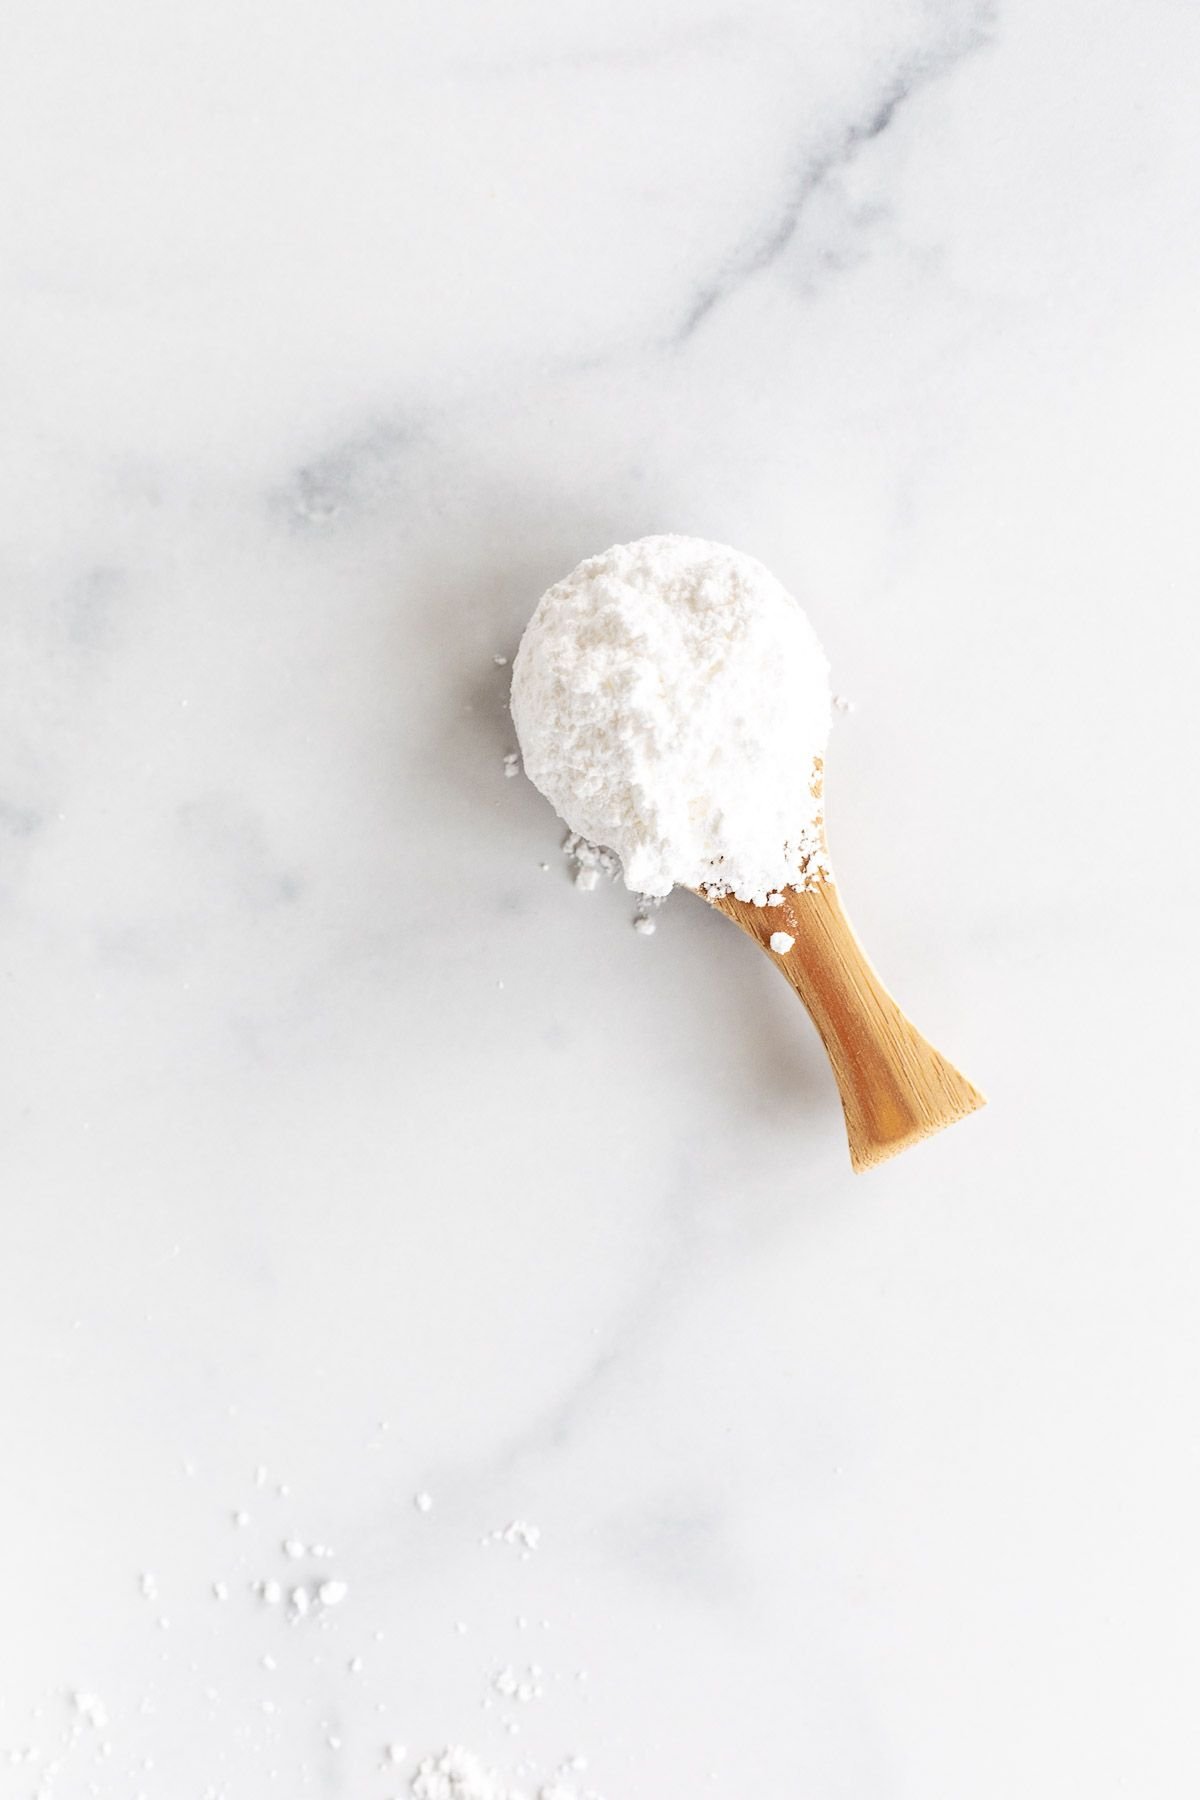 A small wooden spoon full of homemade confectioners sugar